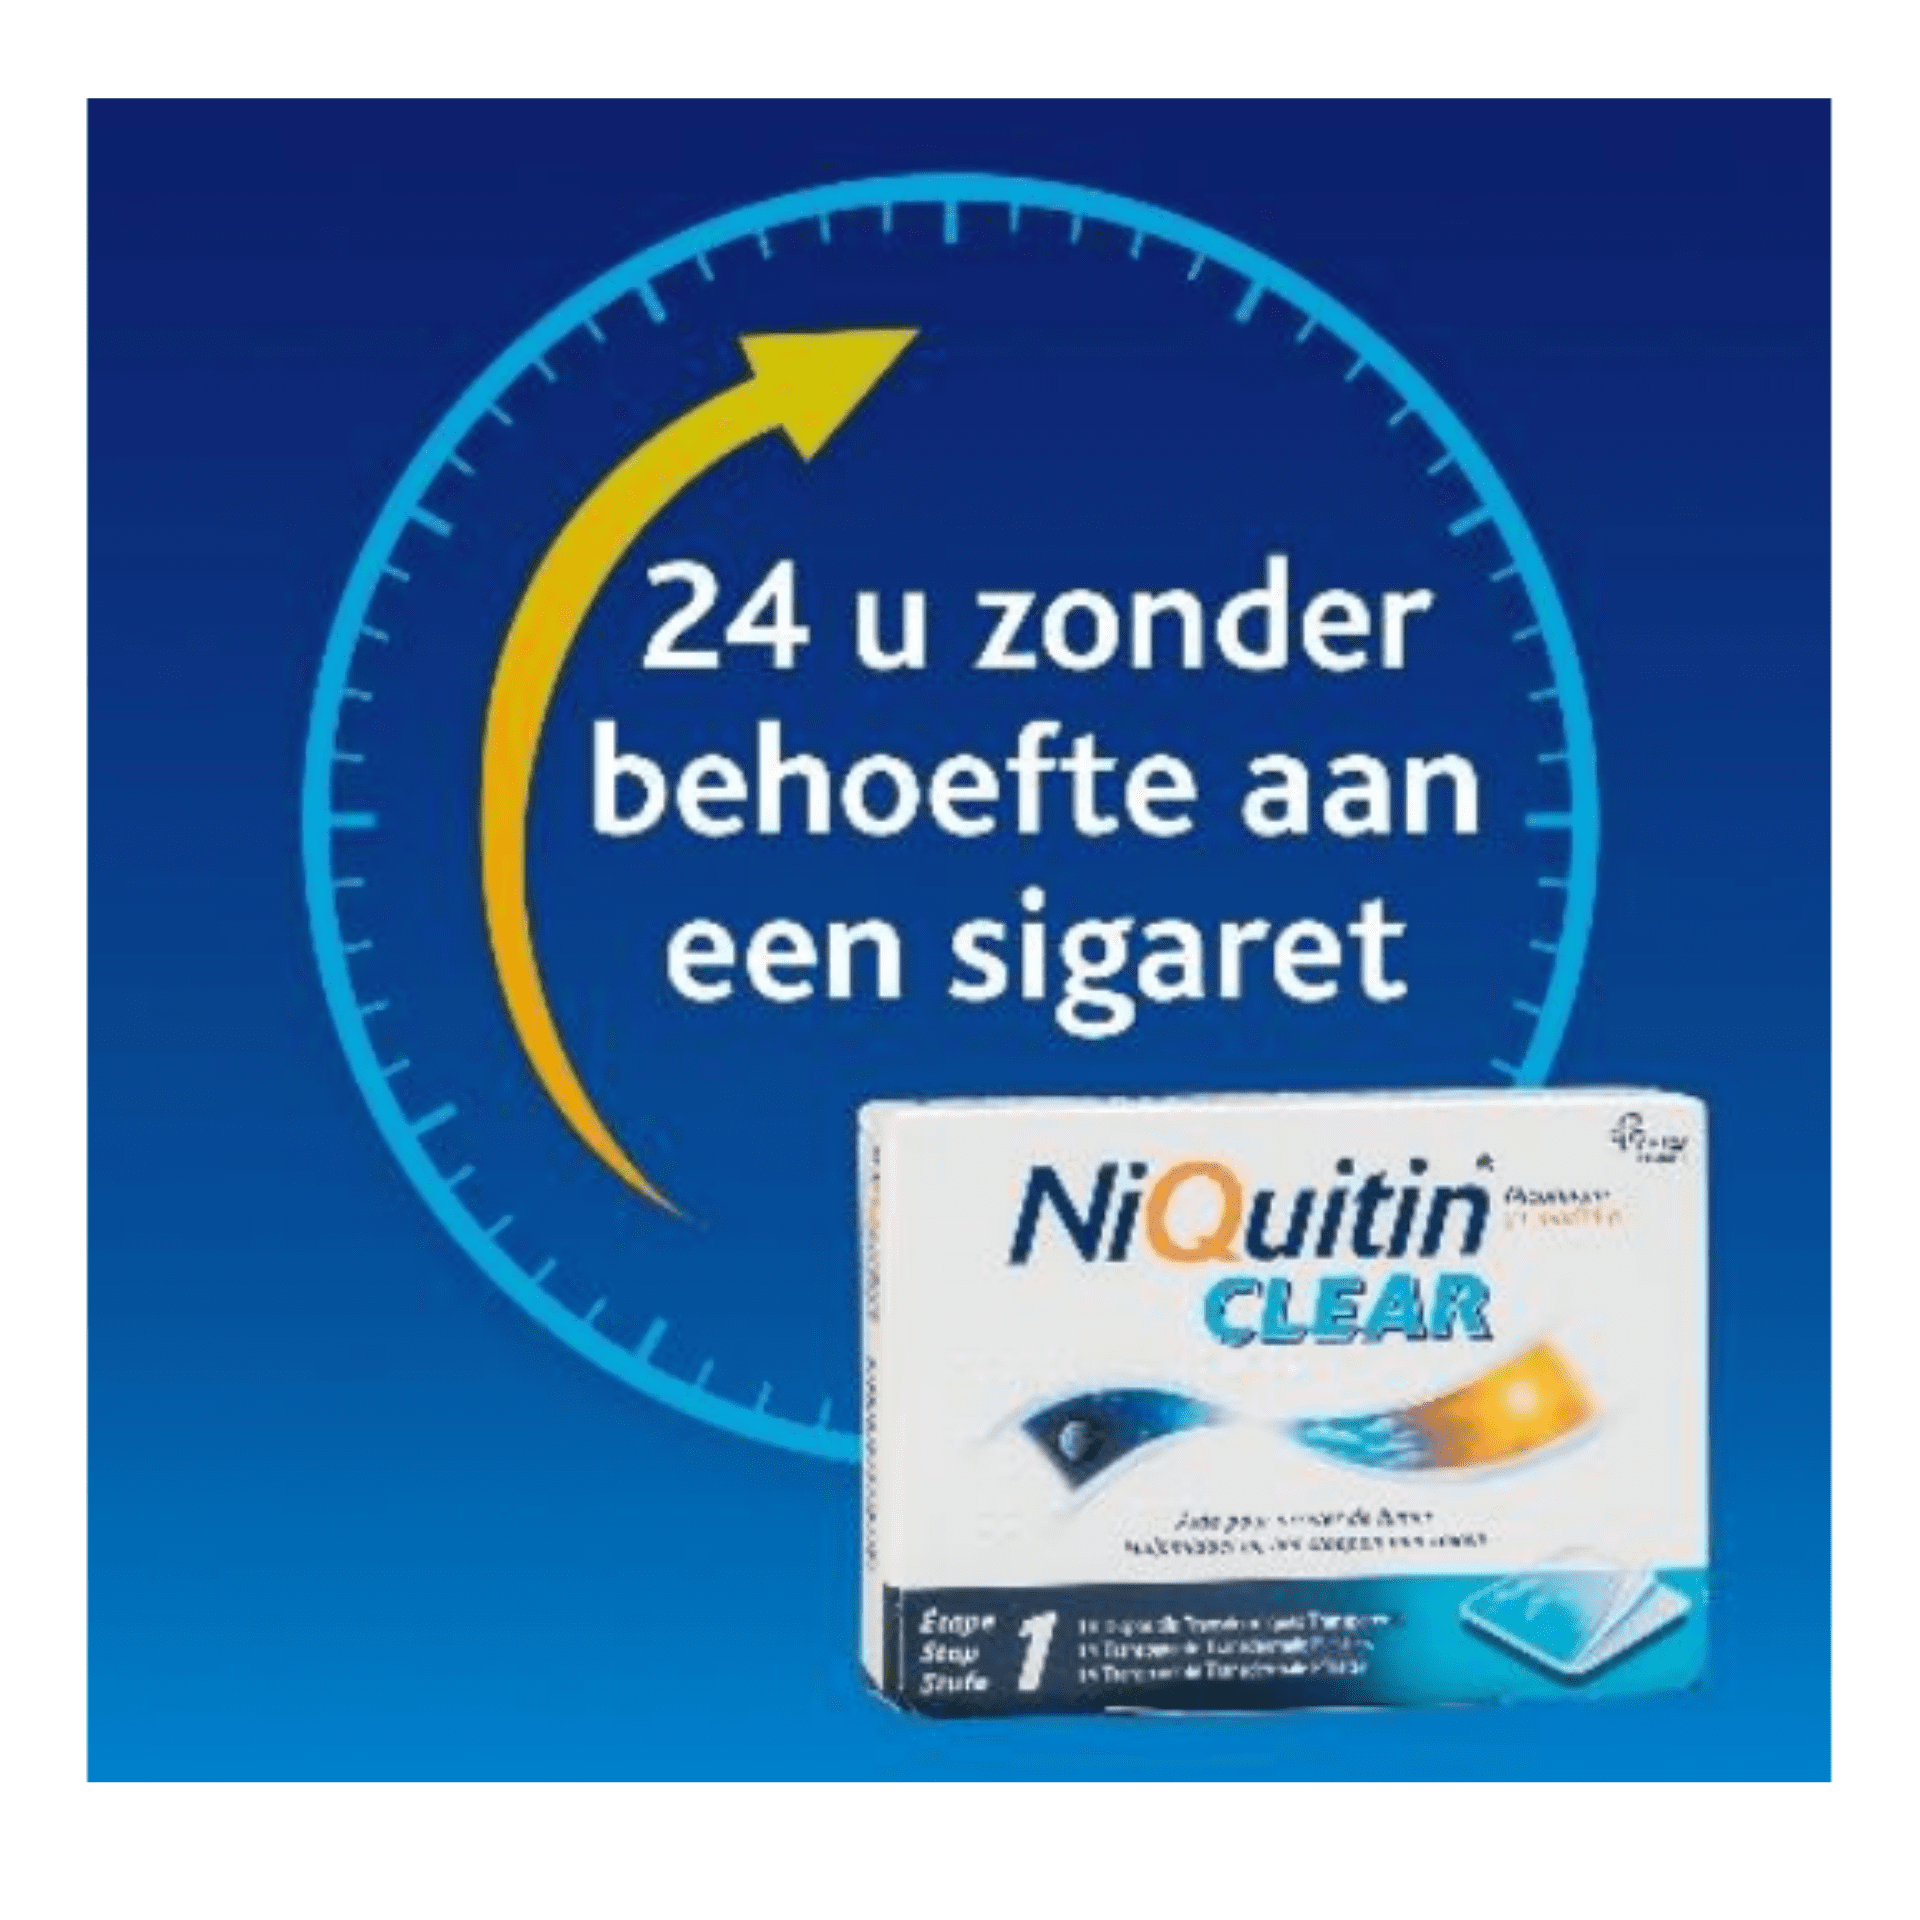 NiQuitin Clear Patches 14 mg